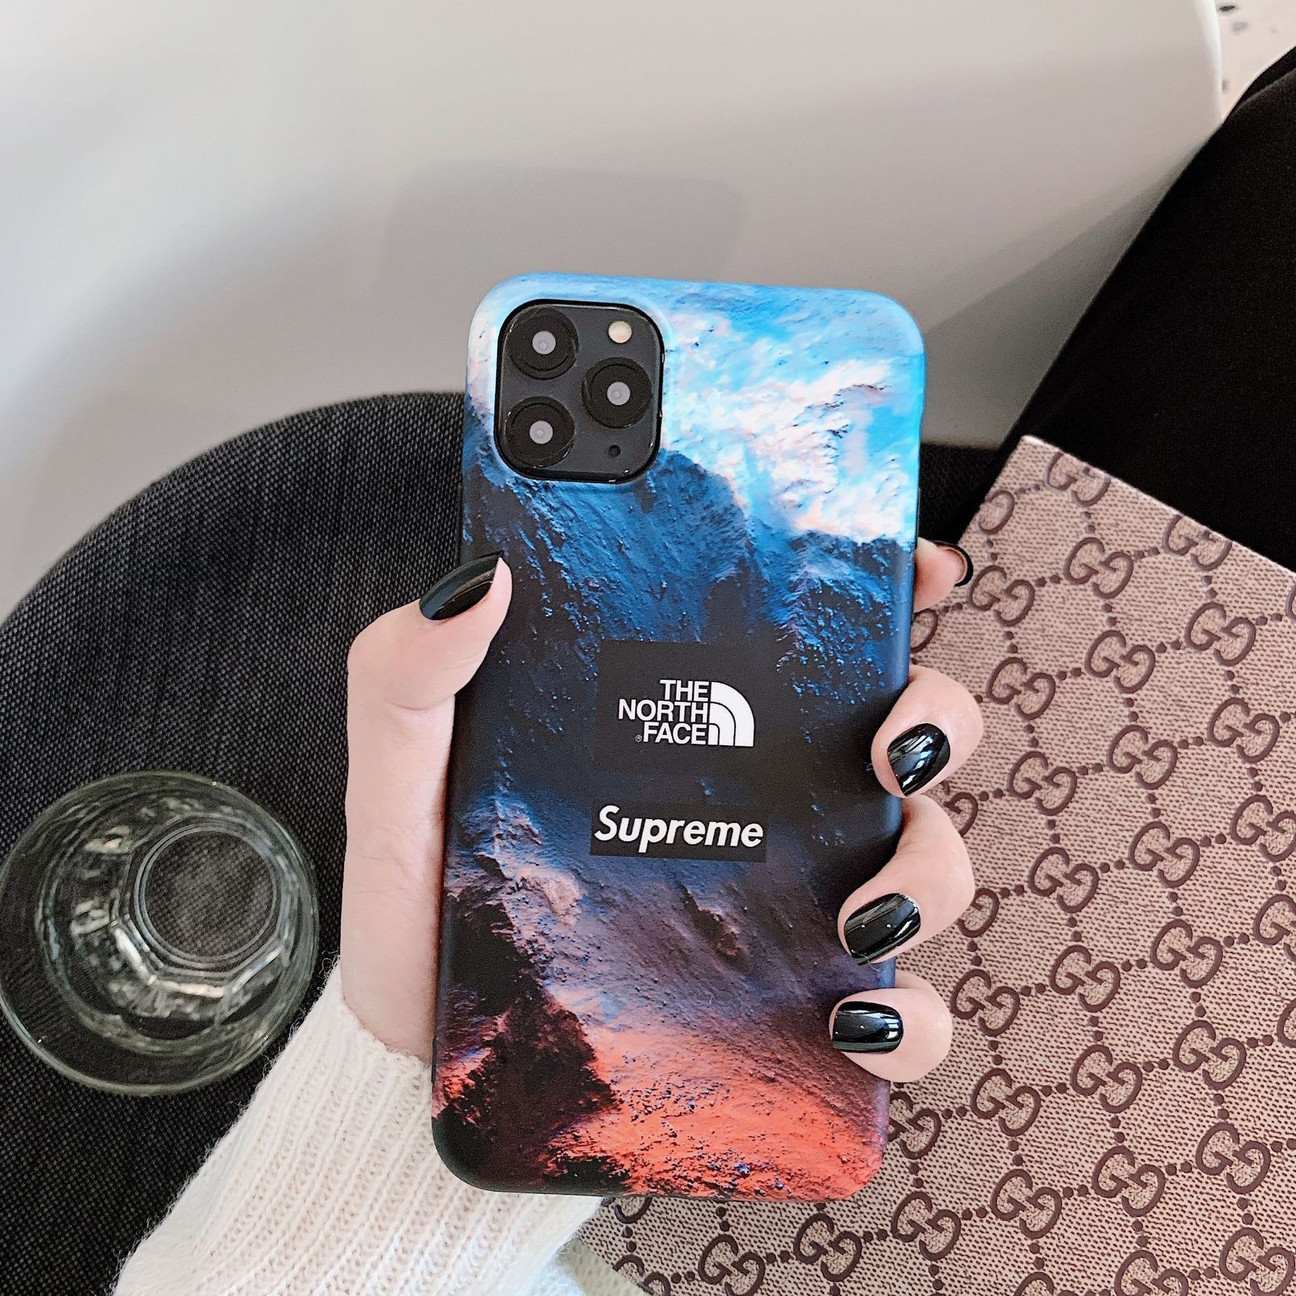 The North Face X Supreme Iphone 11 Pro Max Case Tomorrowsummer